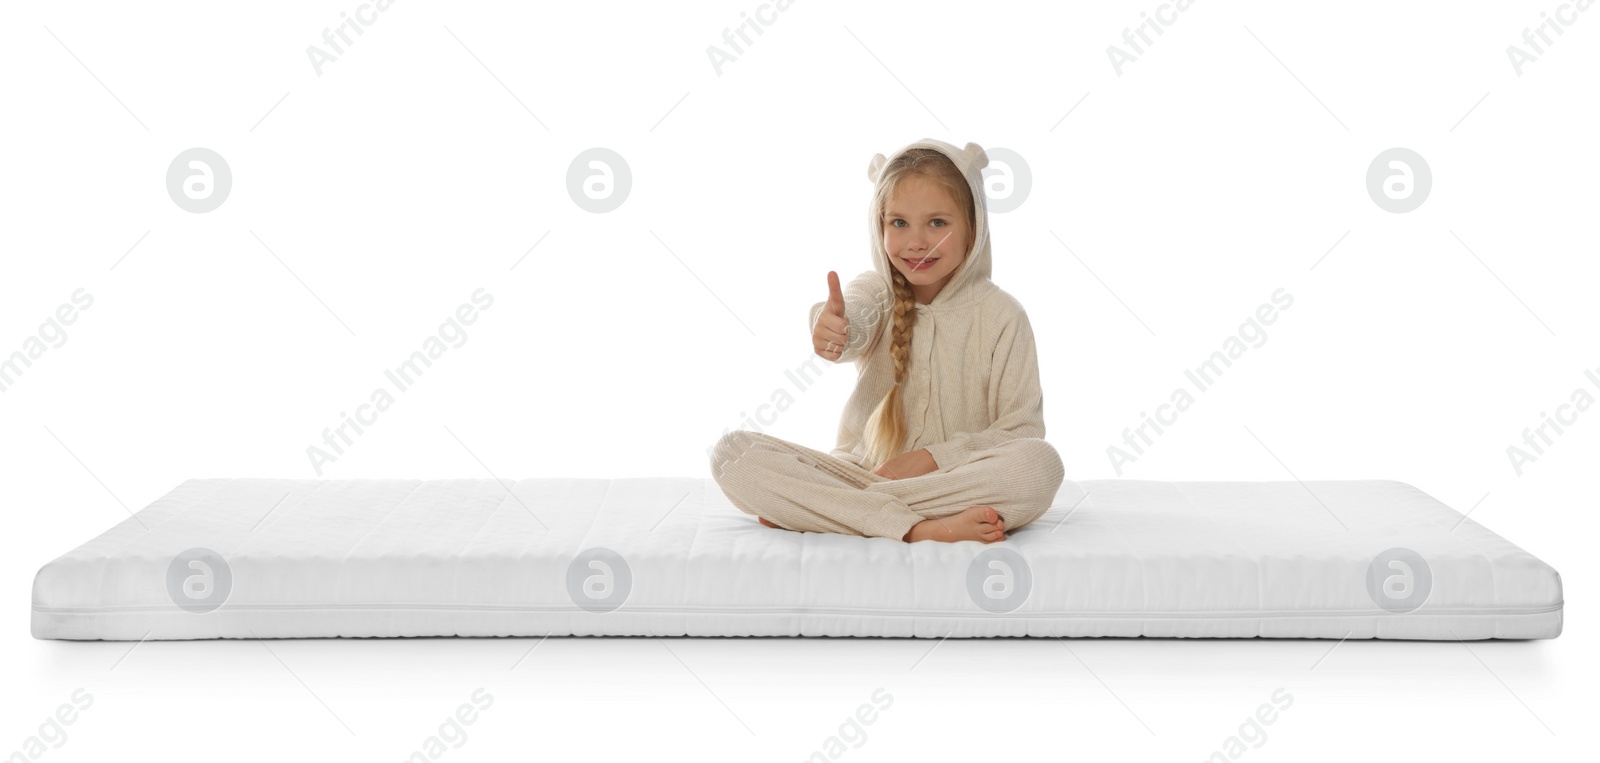 Photo of Little girl sitting on mattress and showing thumb up against white background